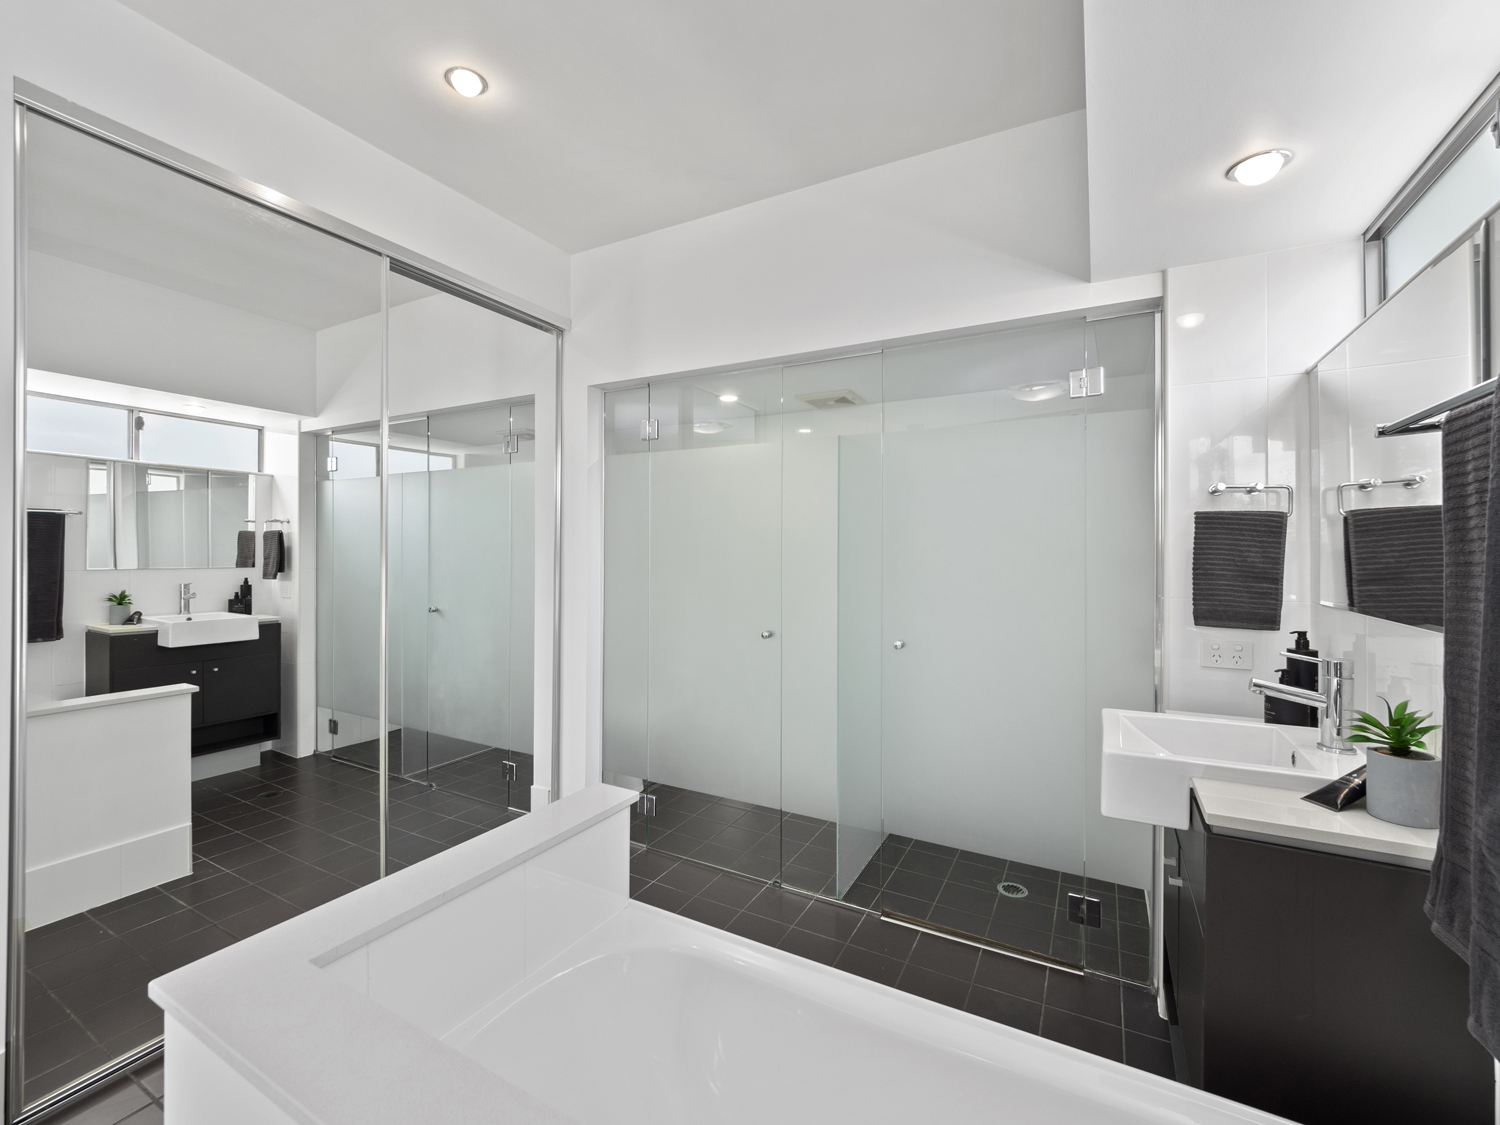 The ensuite - Photographing an apartment for sale at 92 Quay St South Brisbane